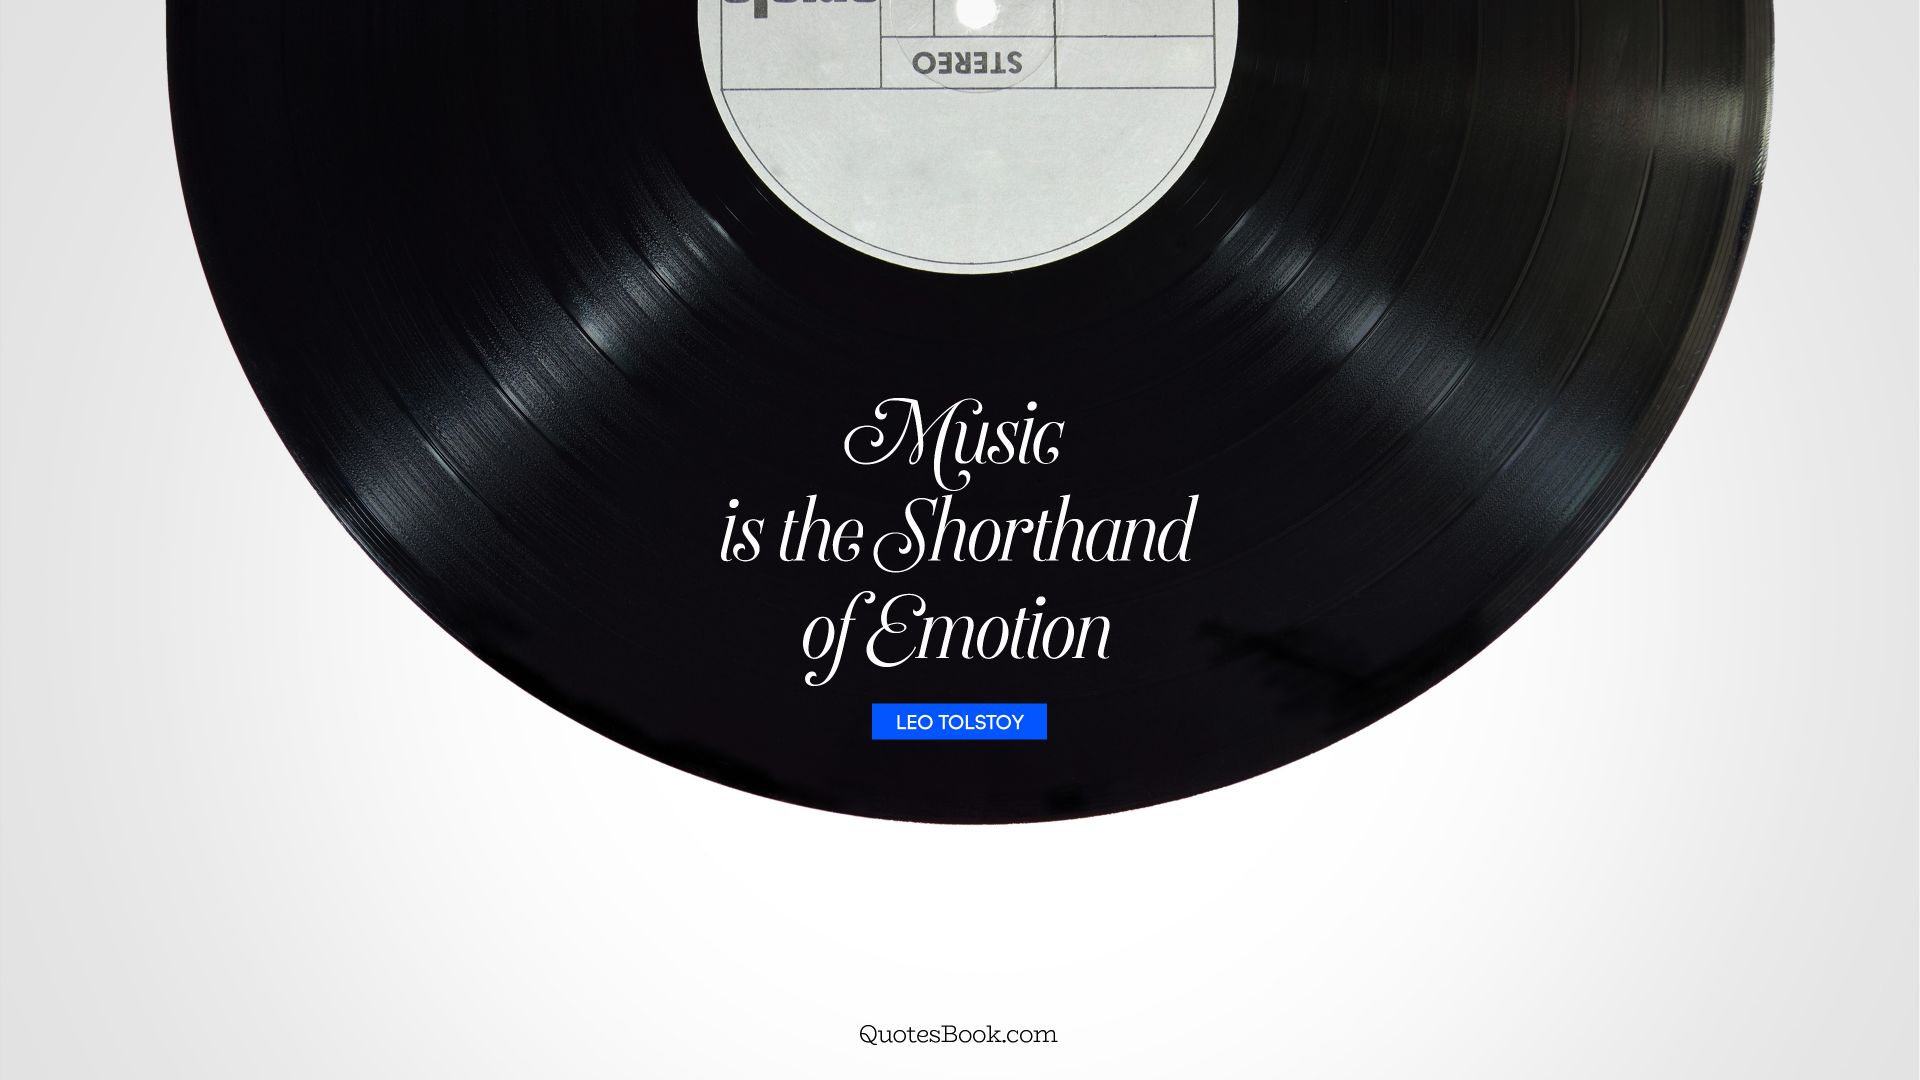 Music is the shorthand of emotion. - Quote by Leo Tolstoy